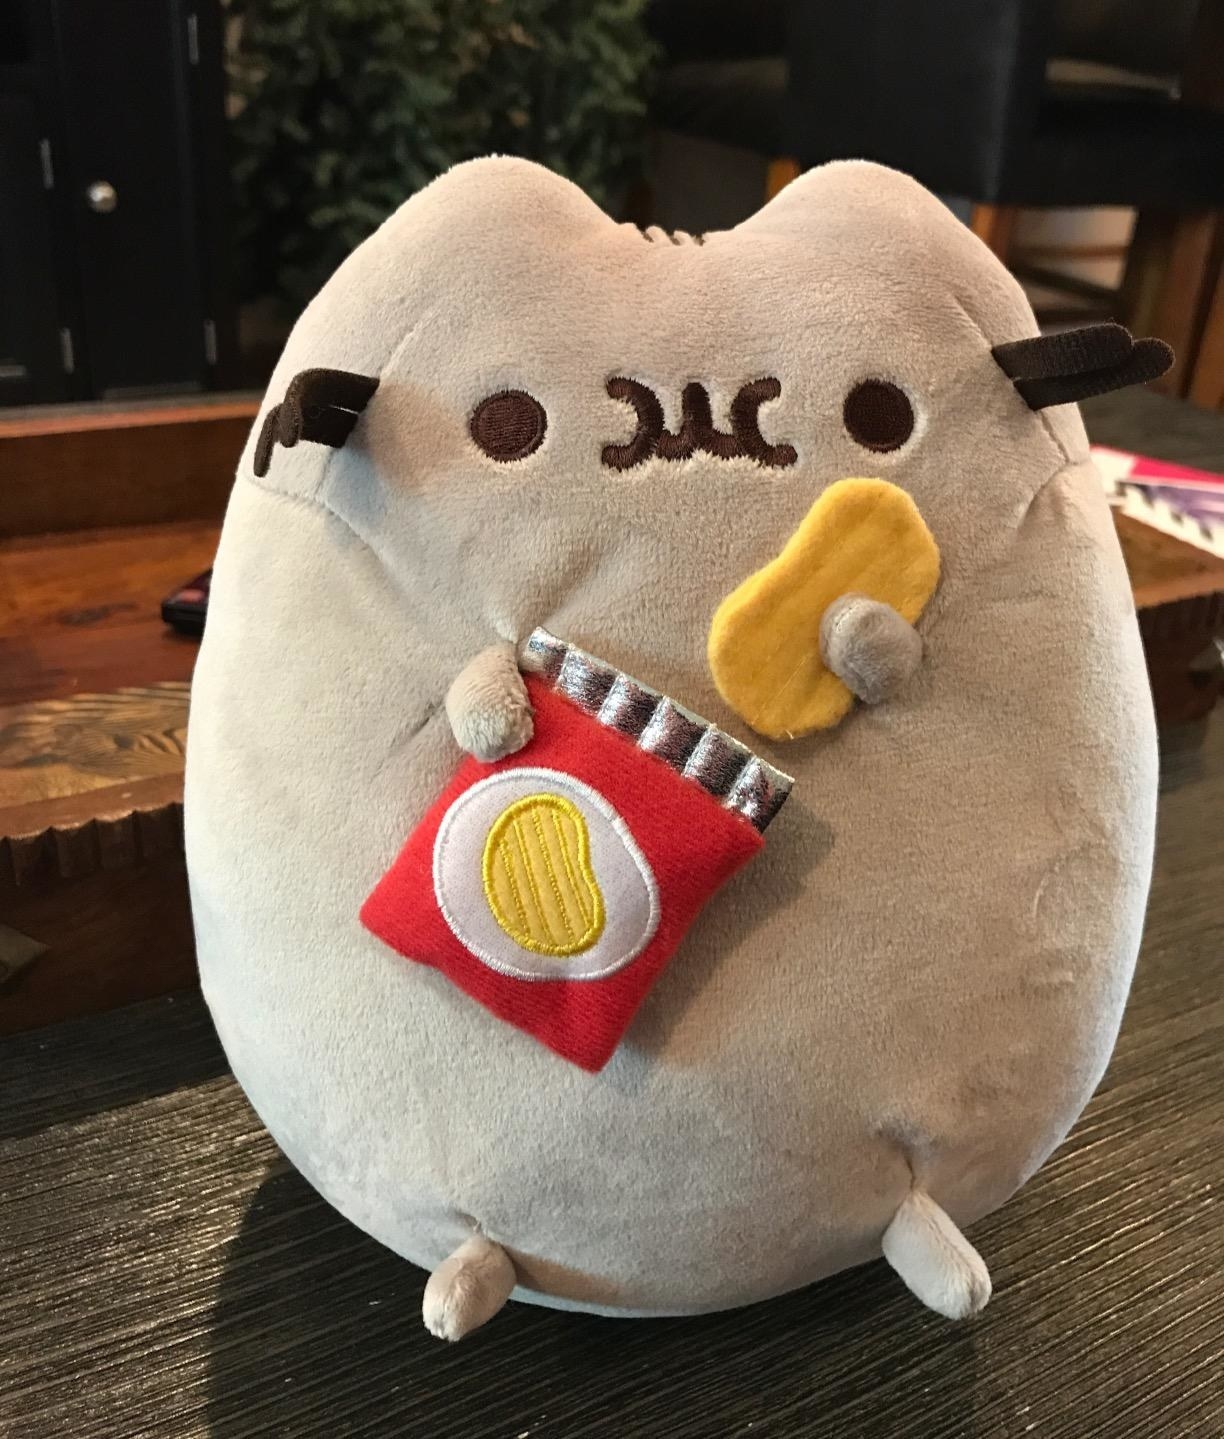 the plush holding a red bag of chips in one hand and a potato chip in the other, with a face like it&#x27;s chewing